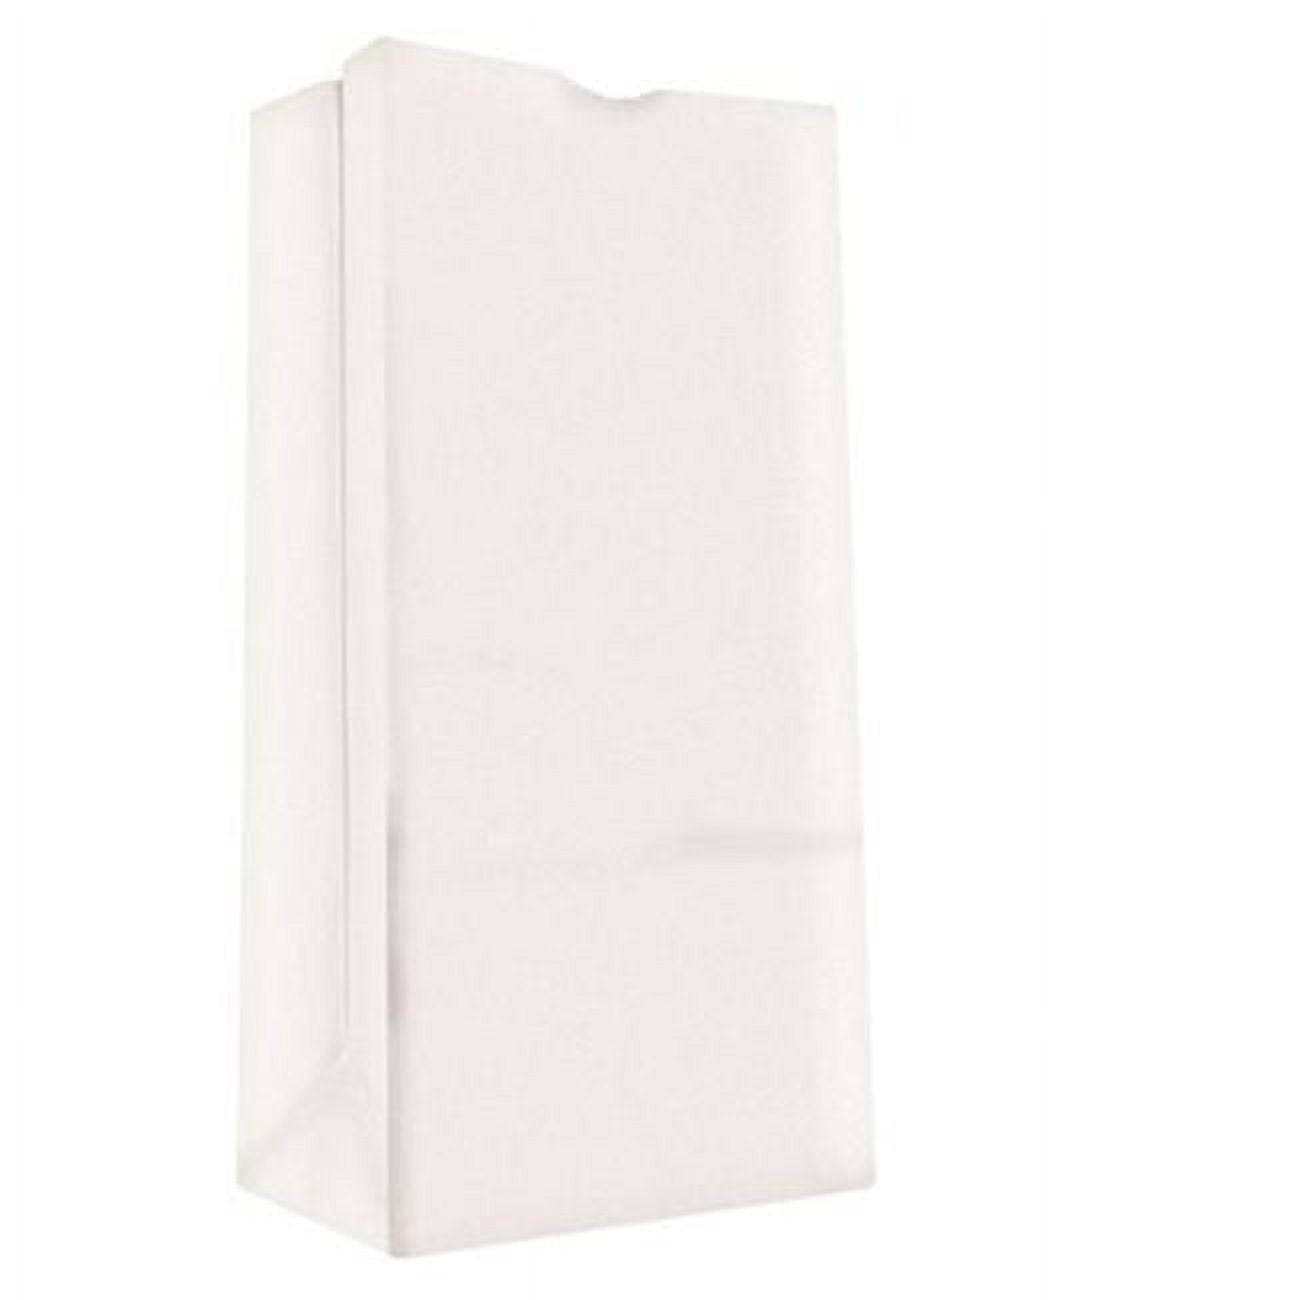 51045 Cpc 5-35 Lbs White Grocery Bag, Silver - Case Of 500